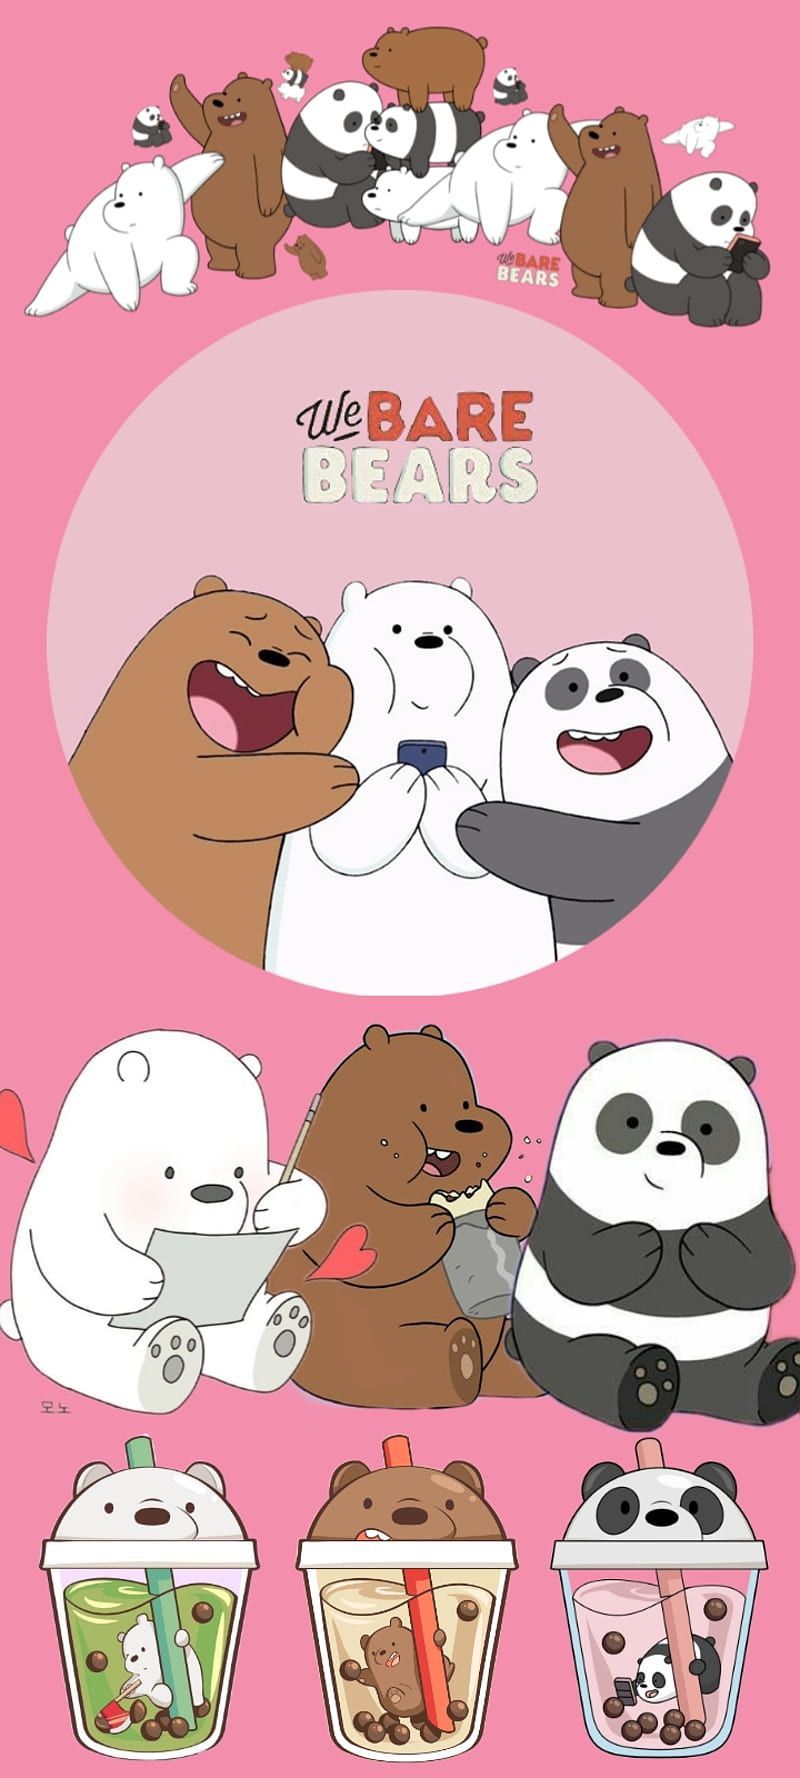 We Bare Bears wallpaper for mobiles and tablets - We Bare Bears